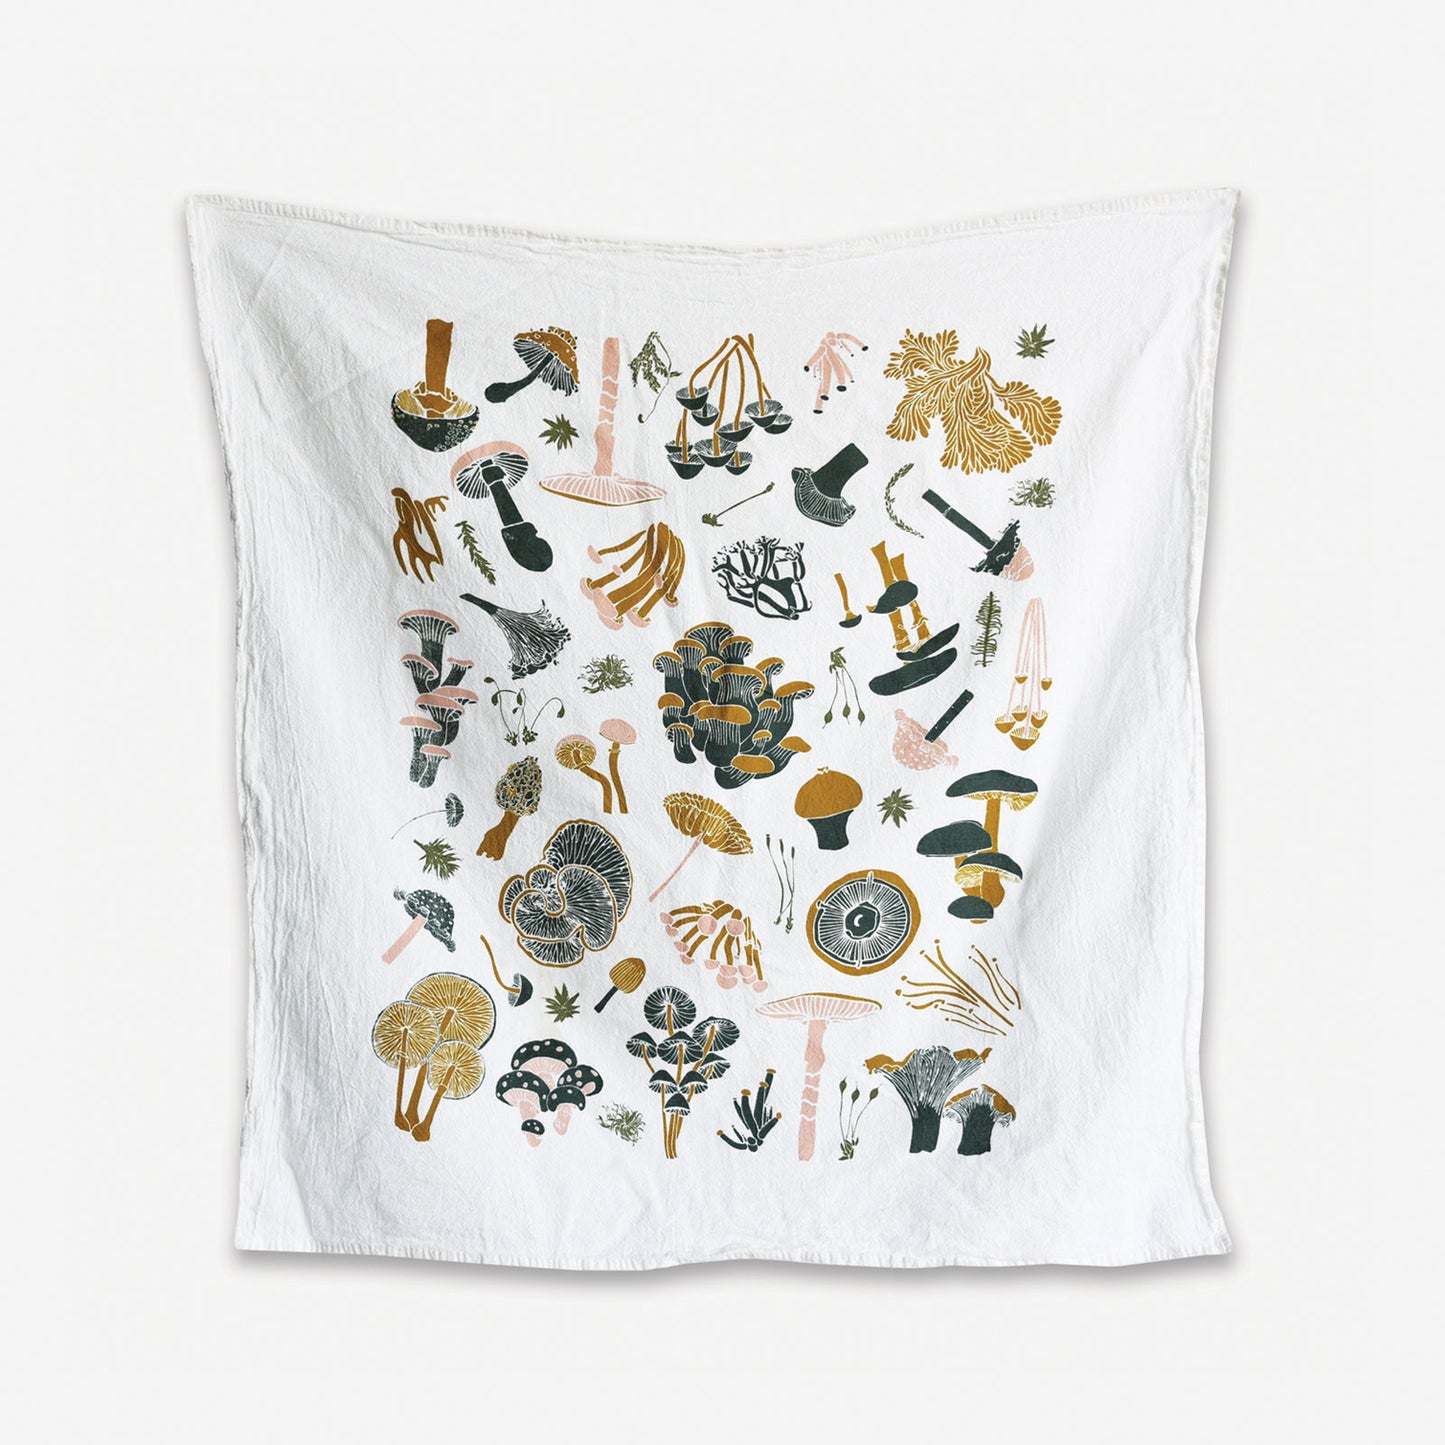 Kitchen tea towel made with eco-friendly flour sack in the USA, featuring botanical Mosses & Mushrooms artwork by June & December artist Katie Forte